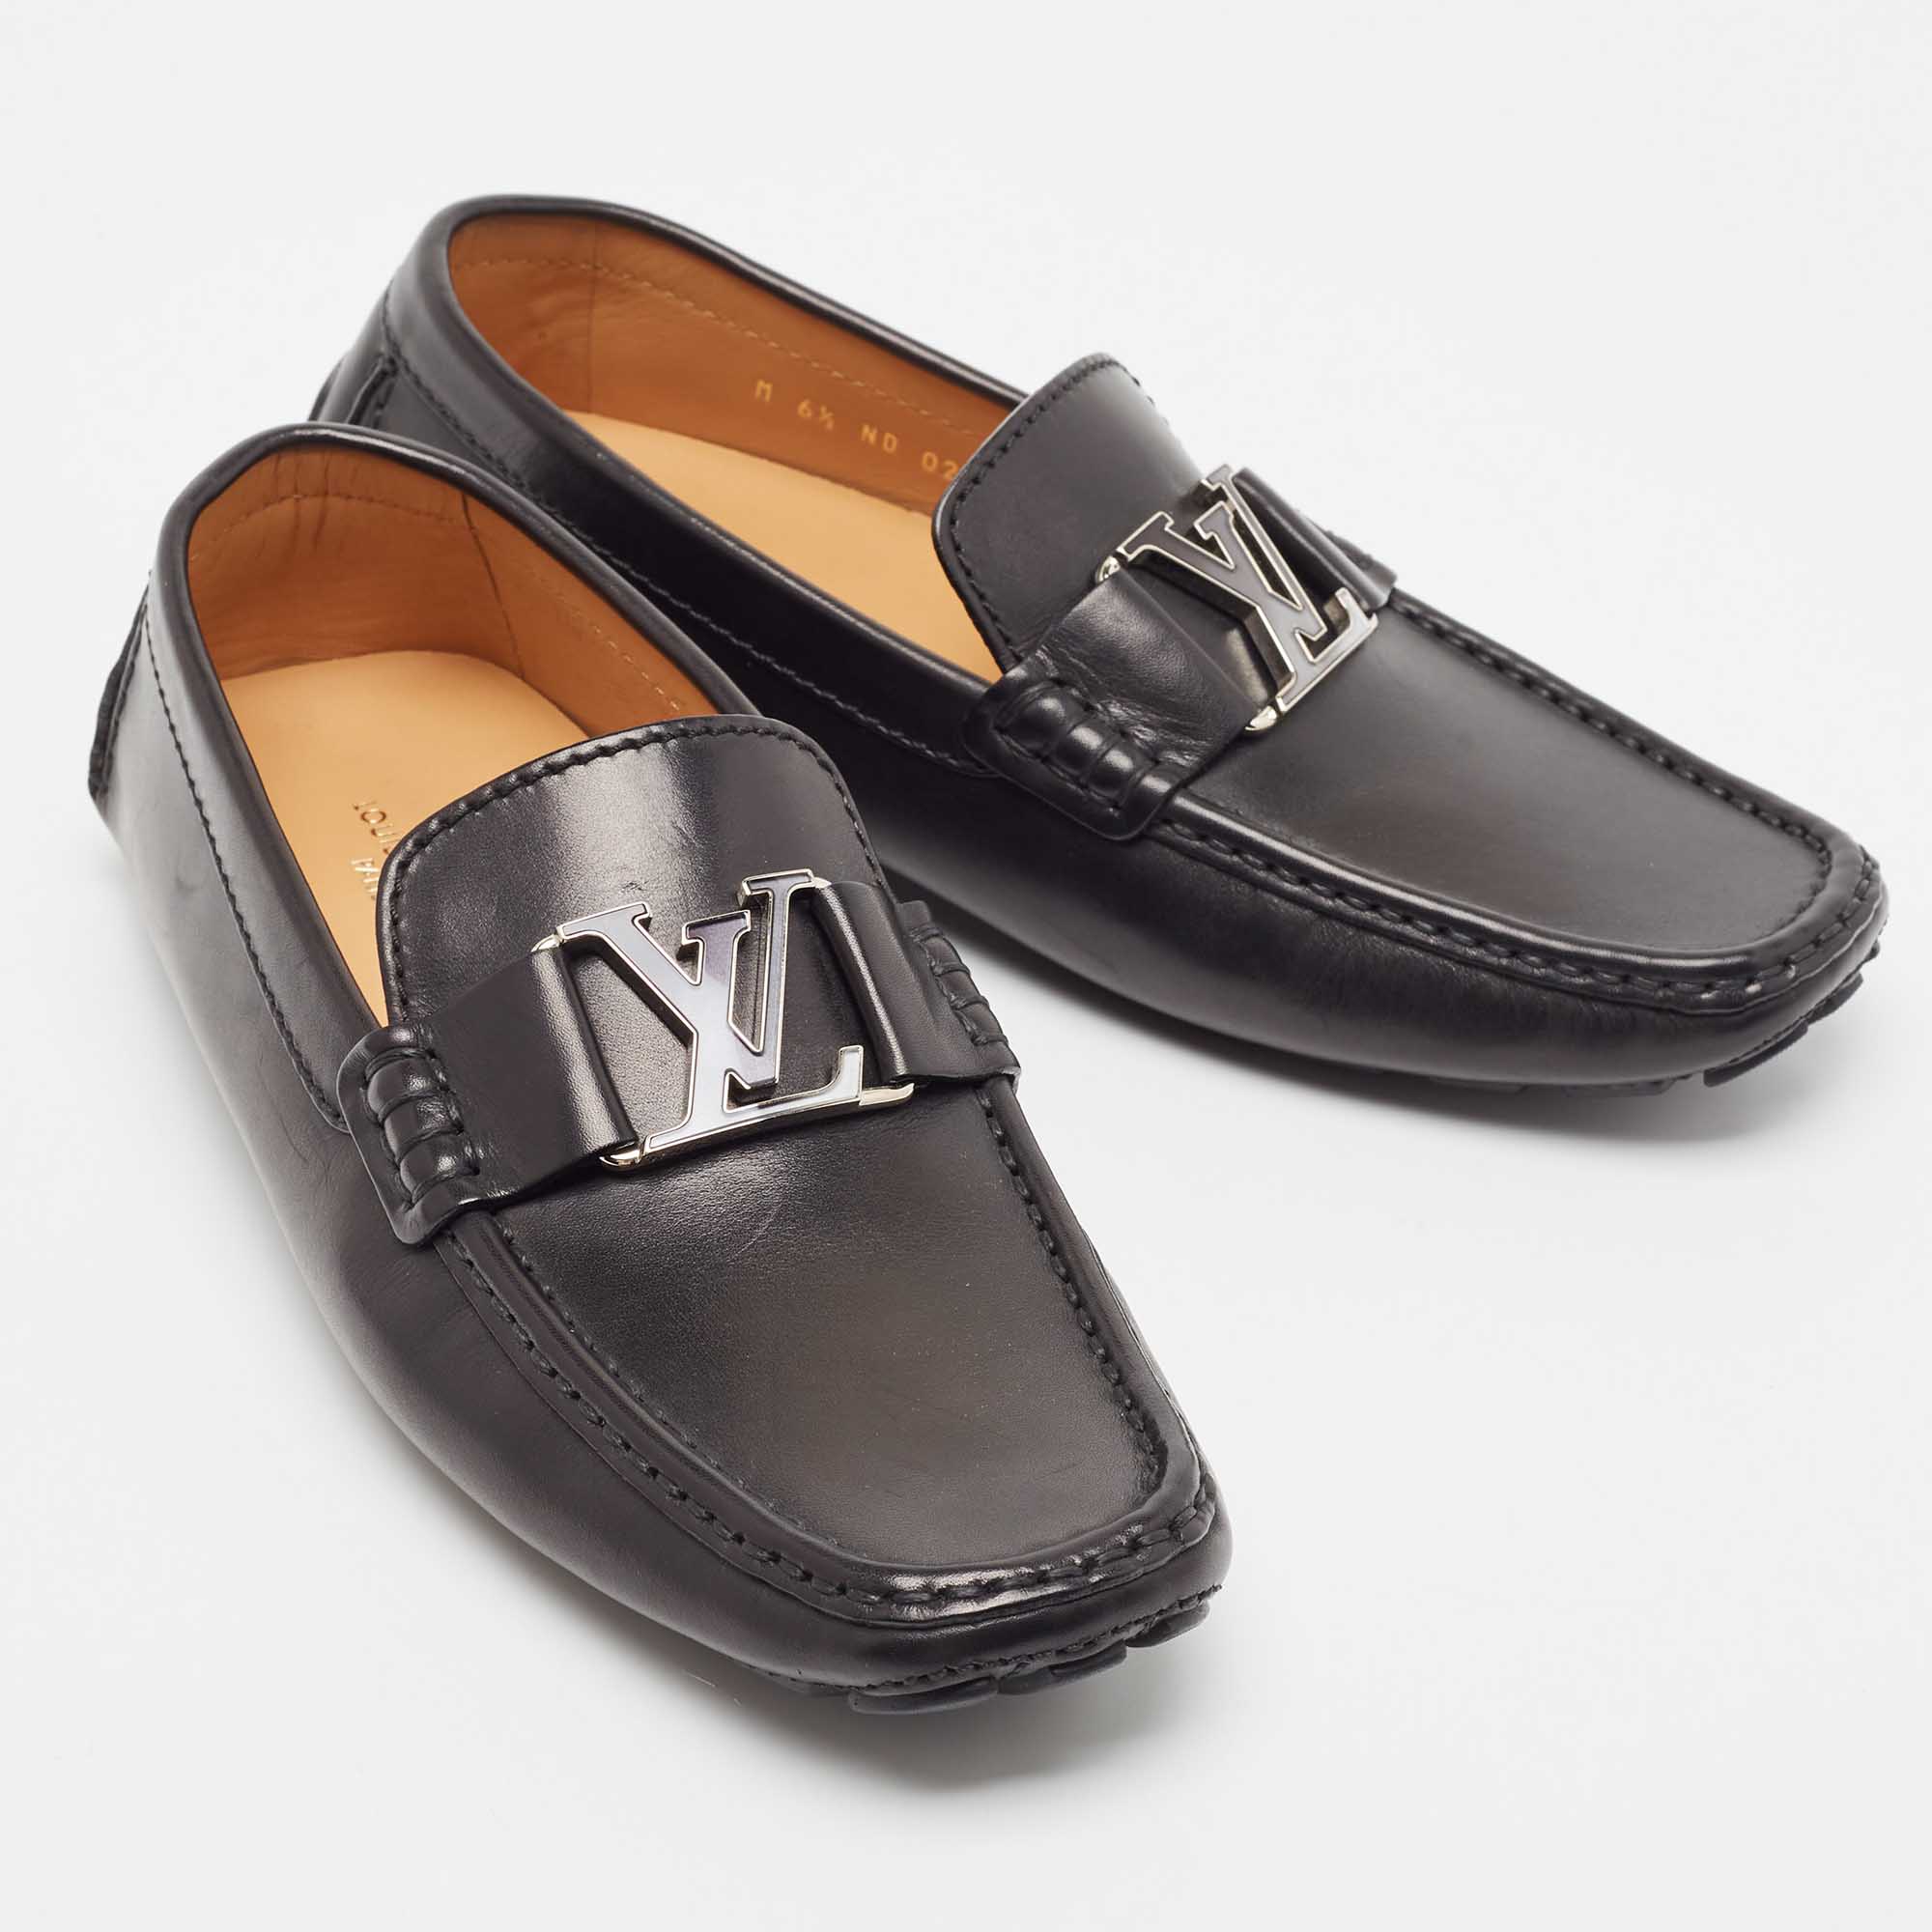 Louis Vuitton Black Leather Monte Carlo Loafers Size 40.5